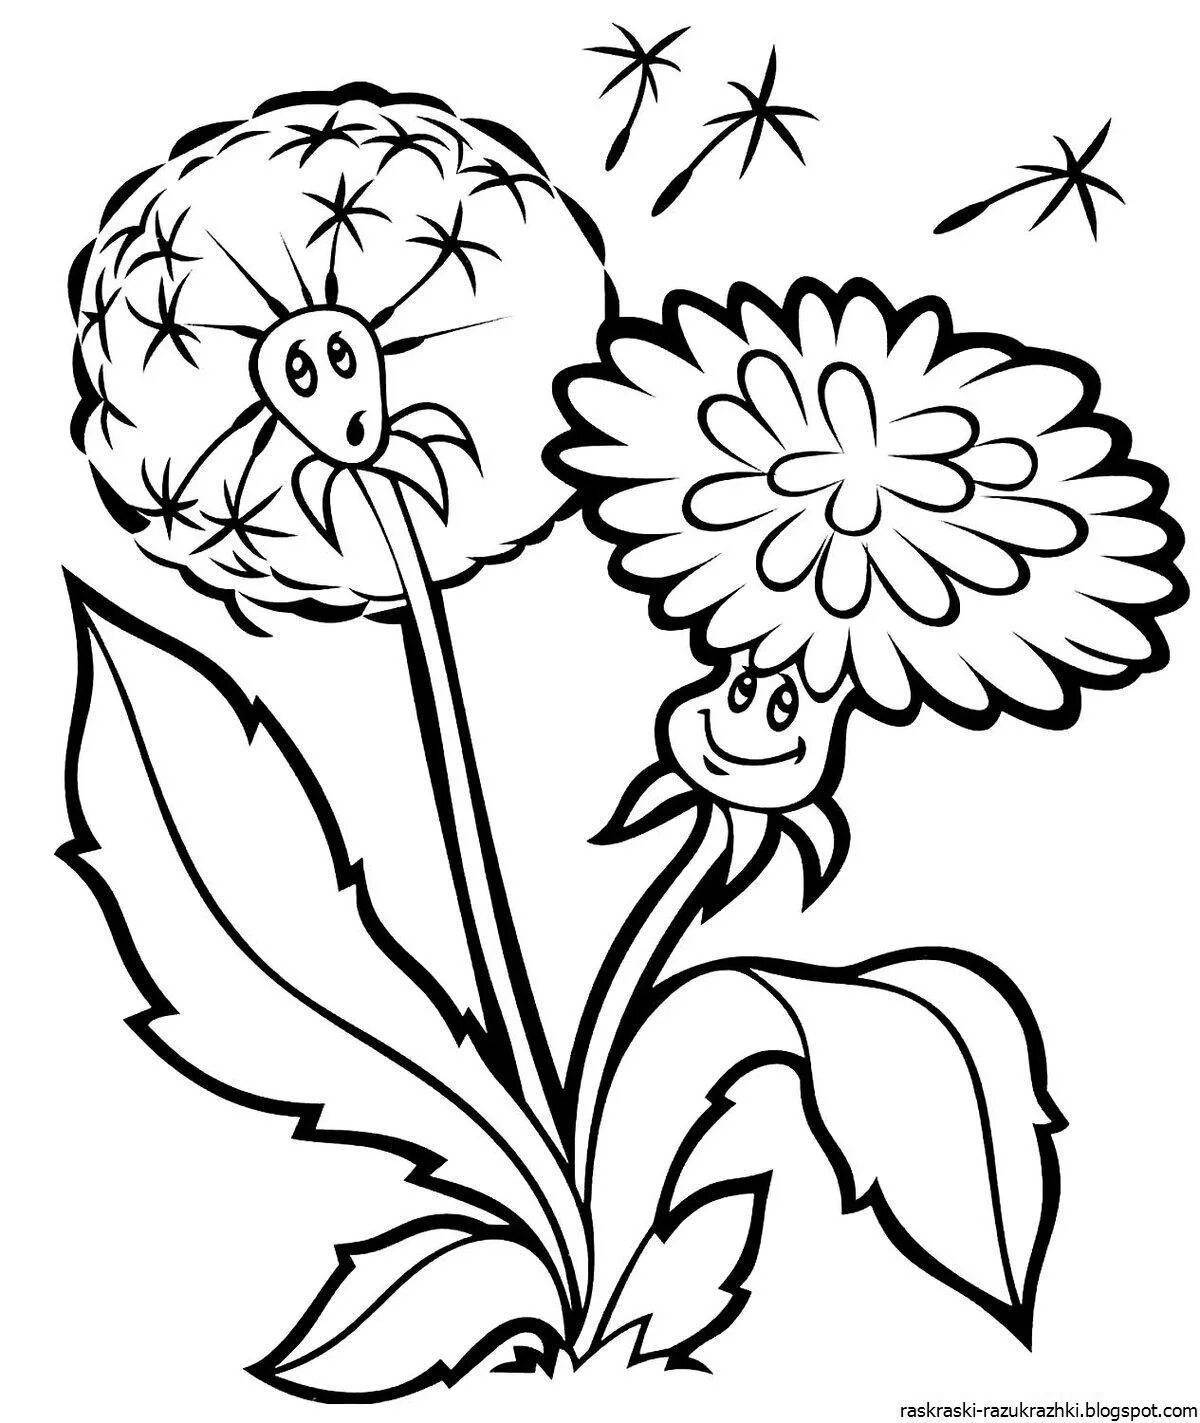 Adorable flower coloring book for kids 5-6 years old